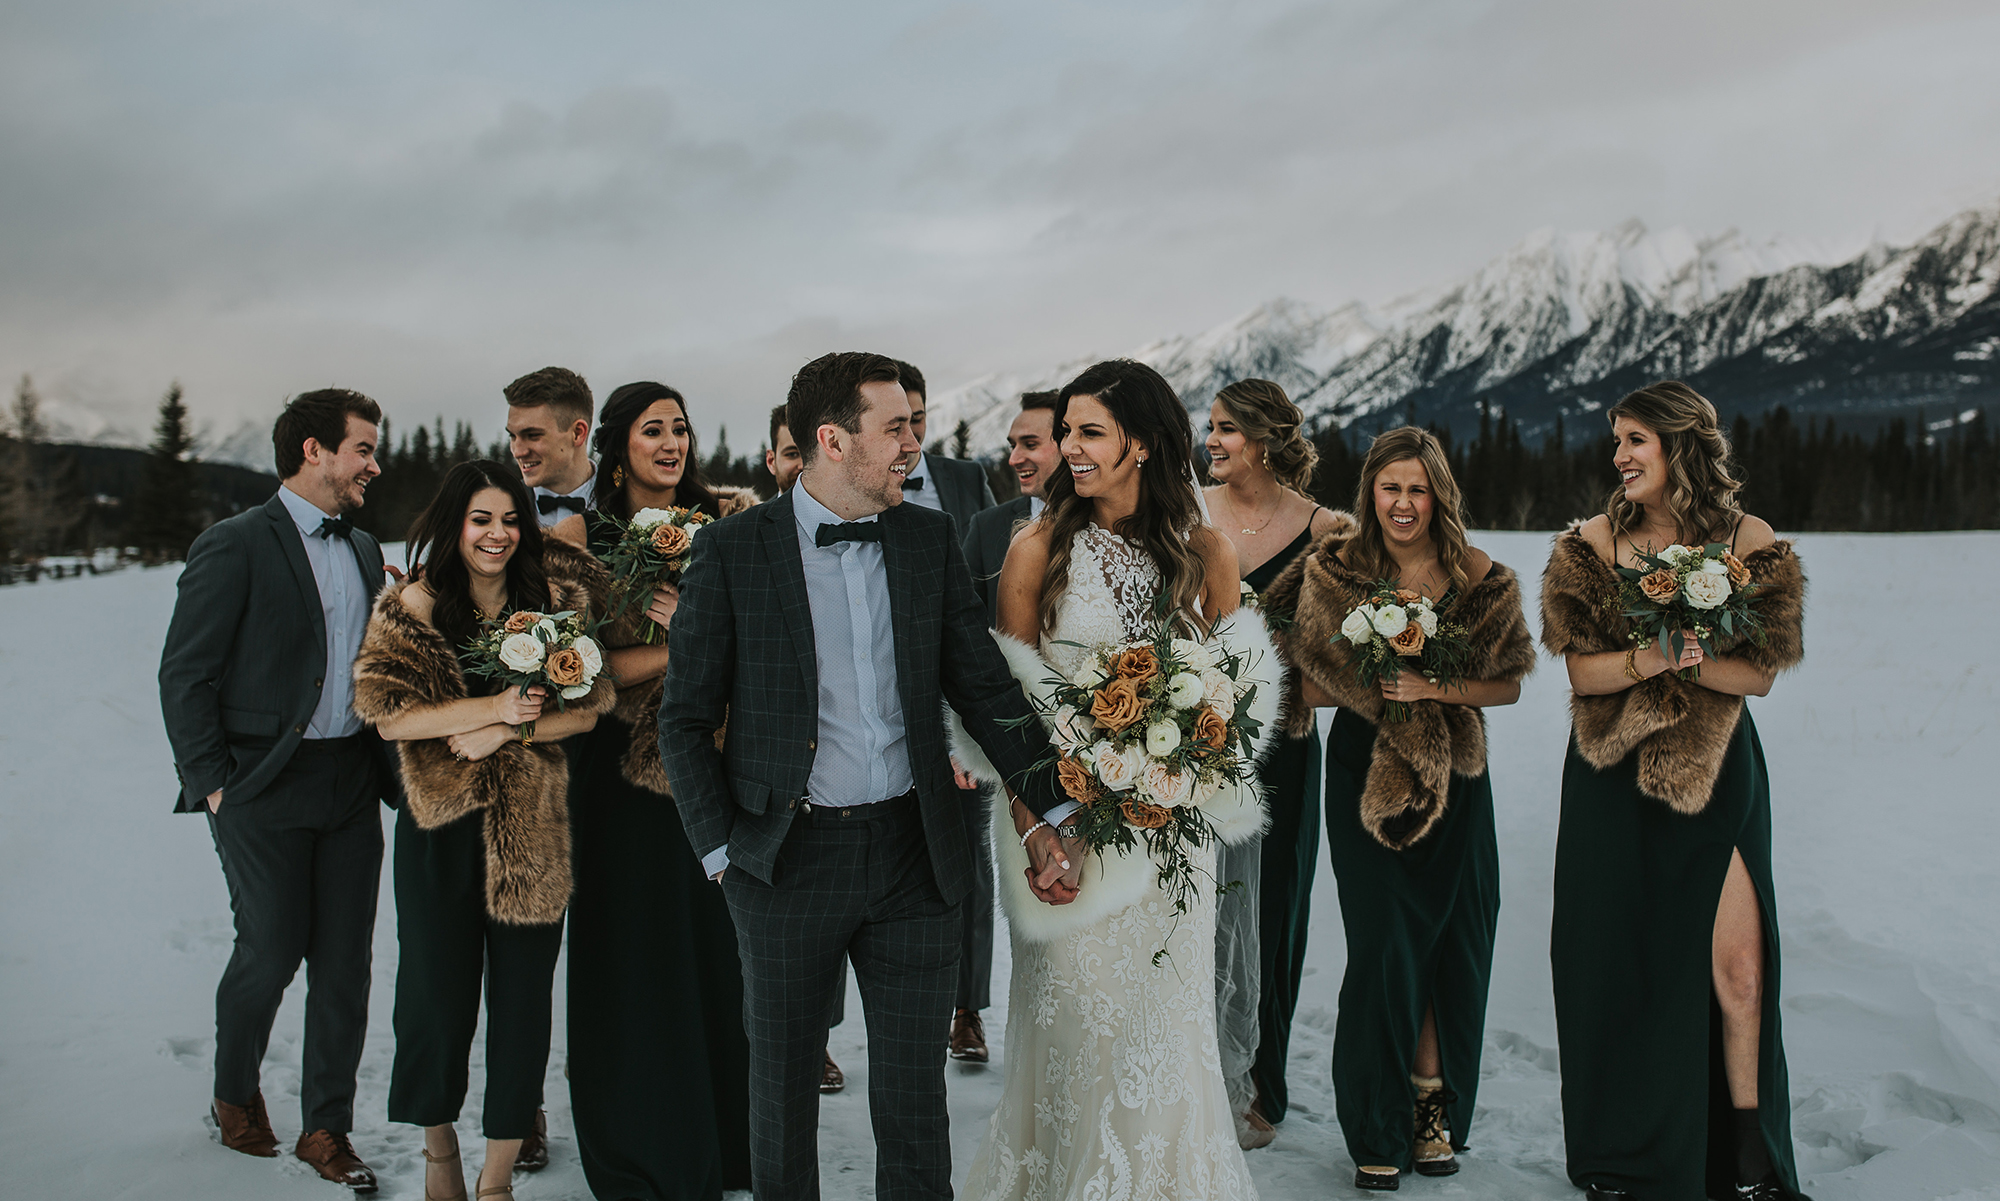 Bride and Groom with Wedding Party in Snow Covered Mountains at Off Season Wedding